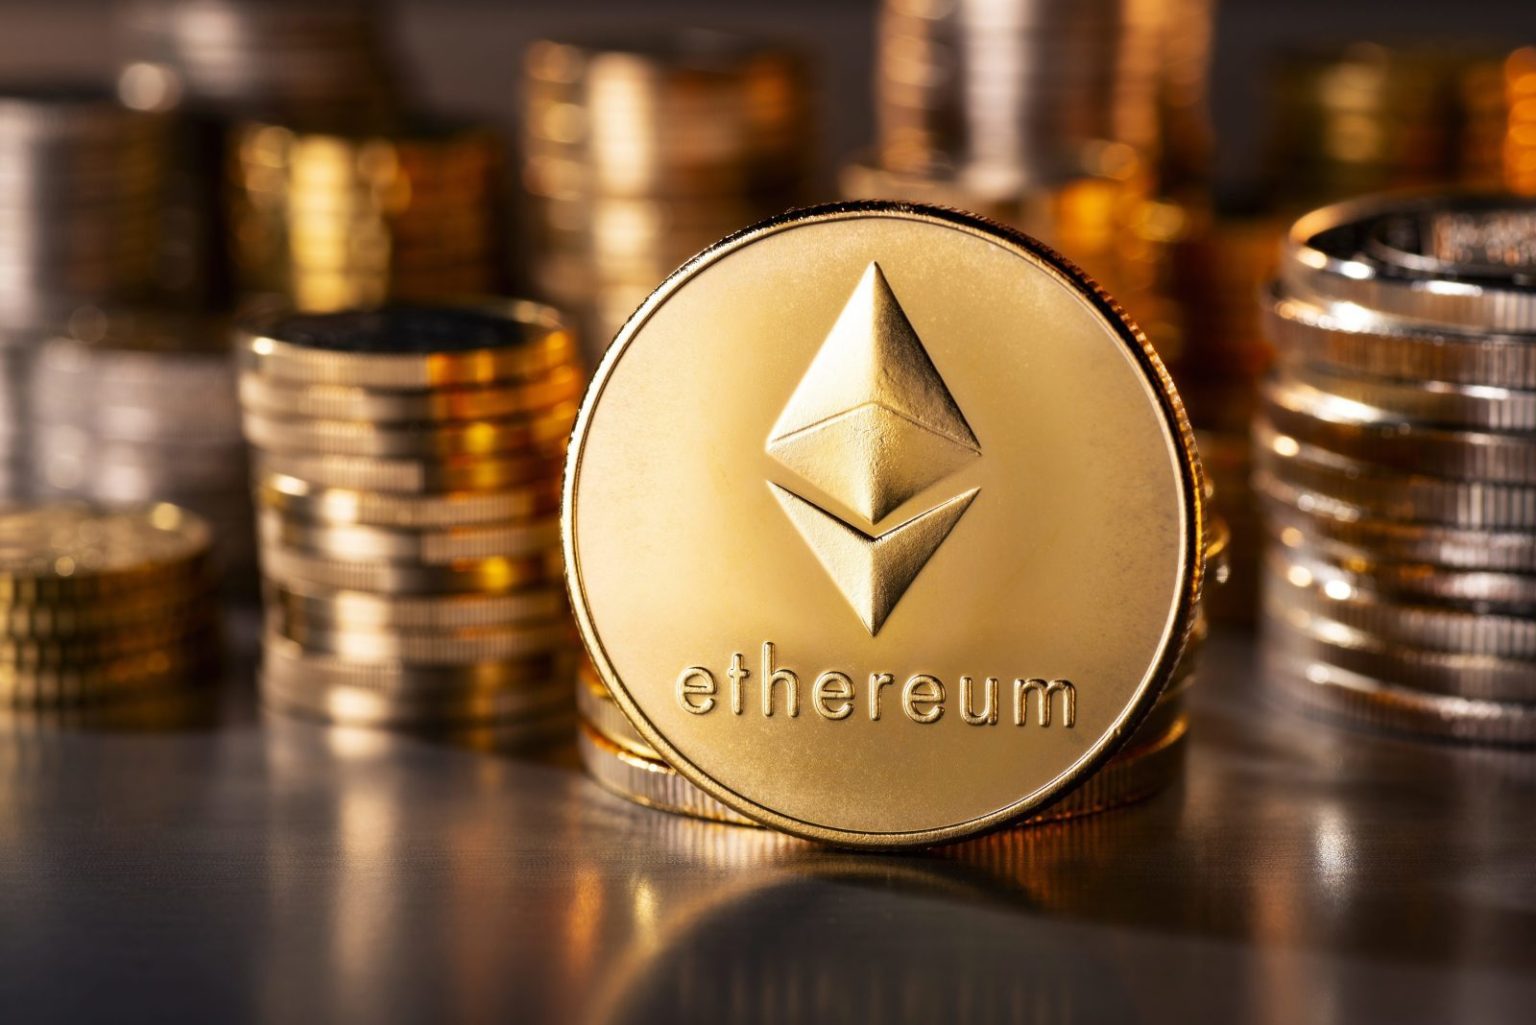 Ethereum once again reached an all-time high